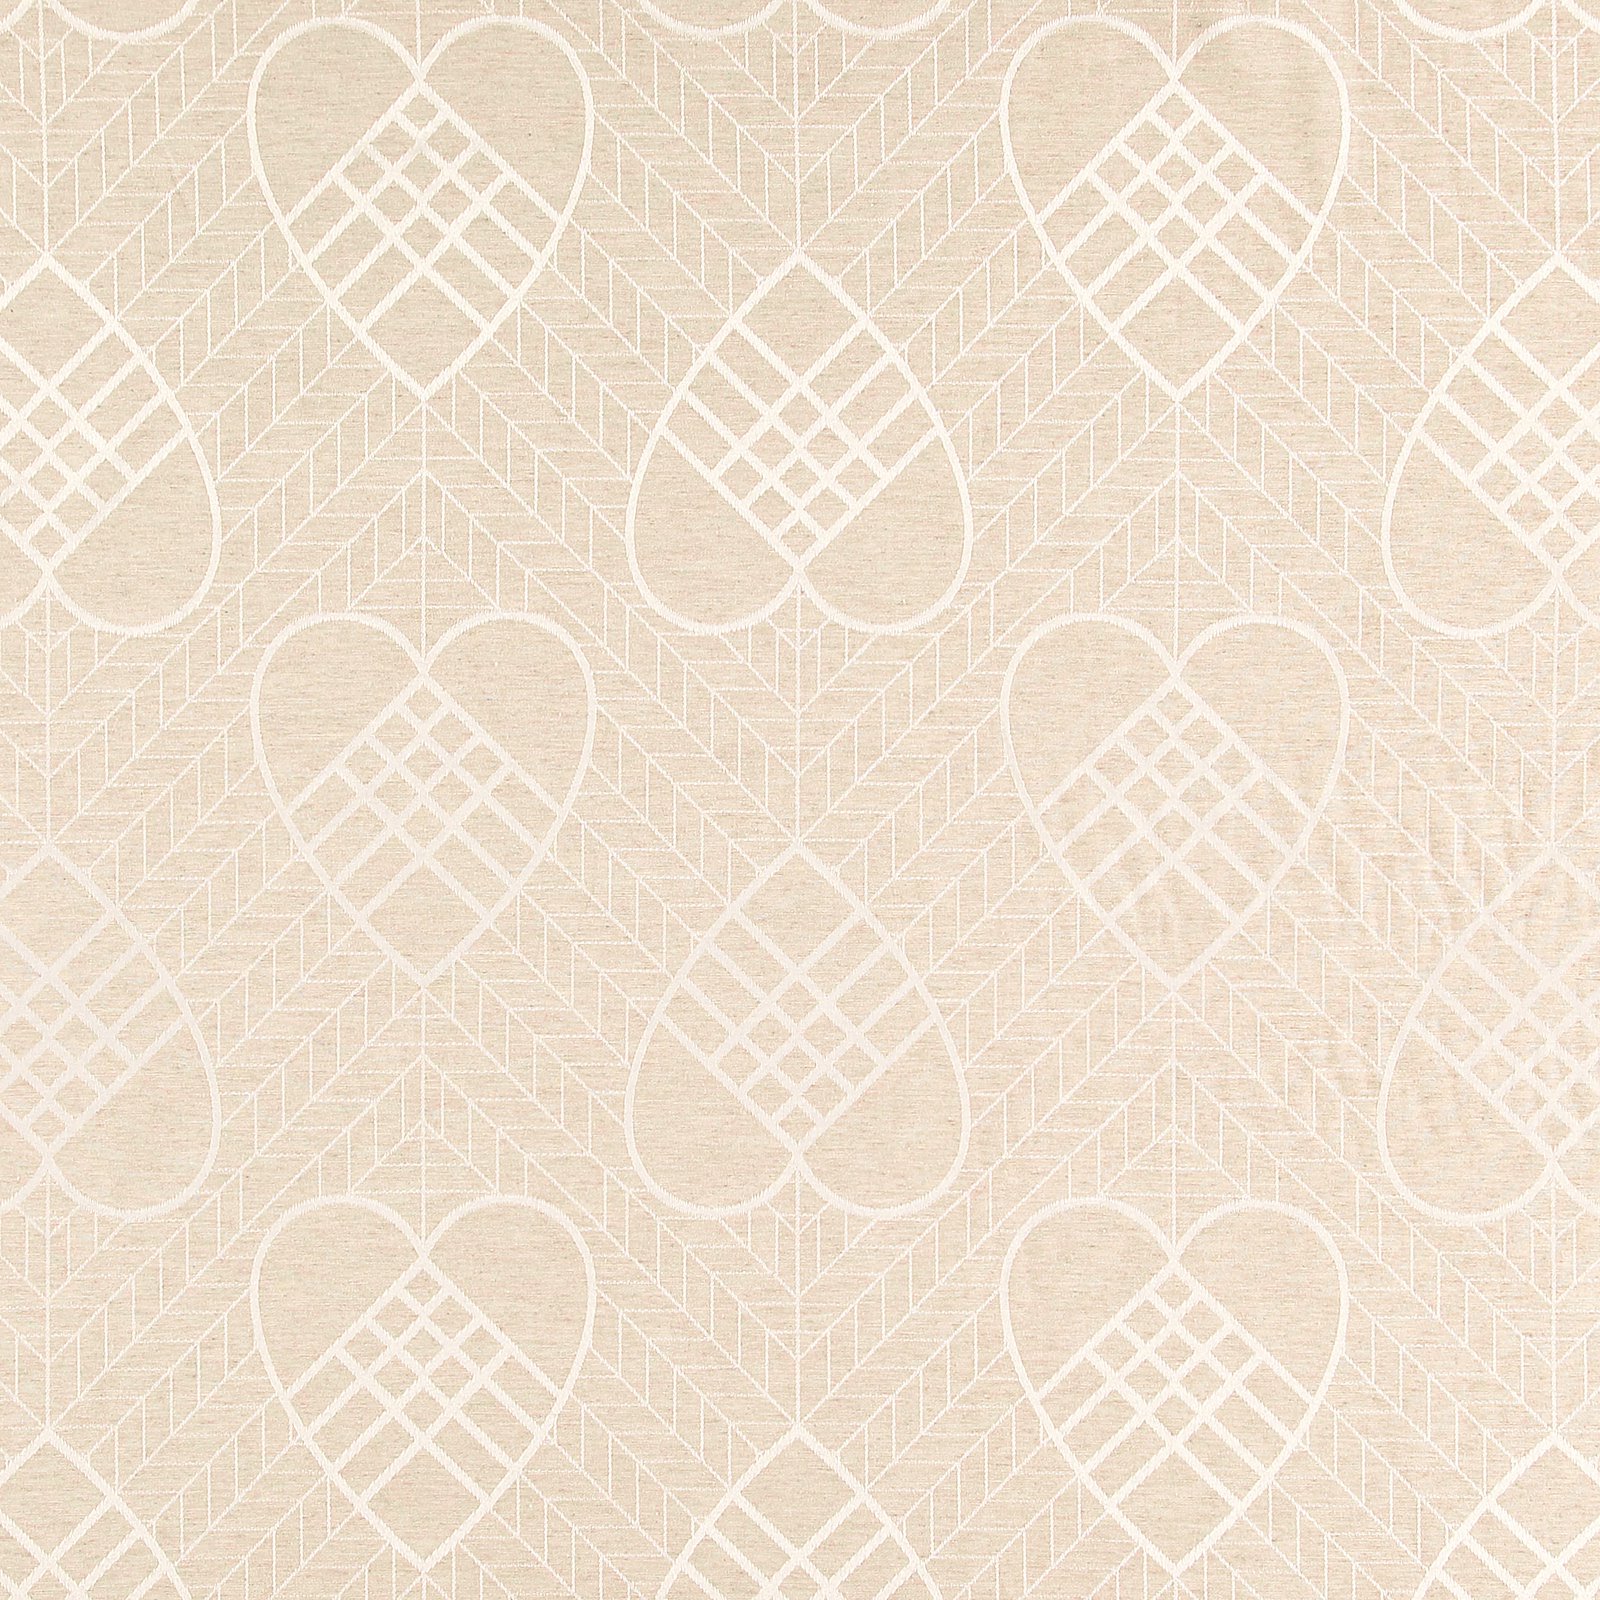 Recycled jacquard linen look w hearts 803852_pack_sp